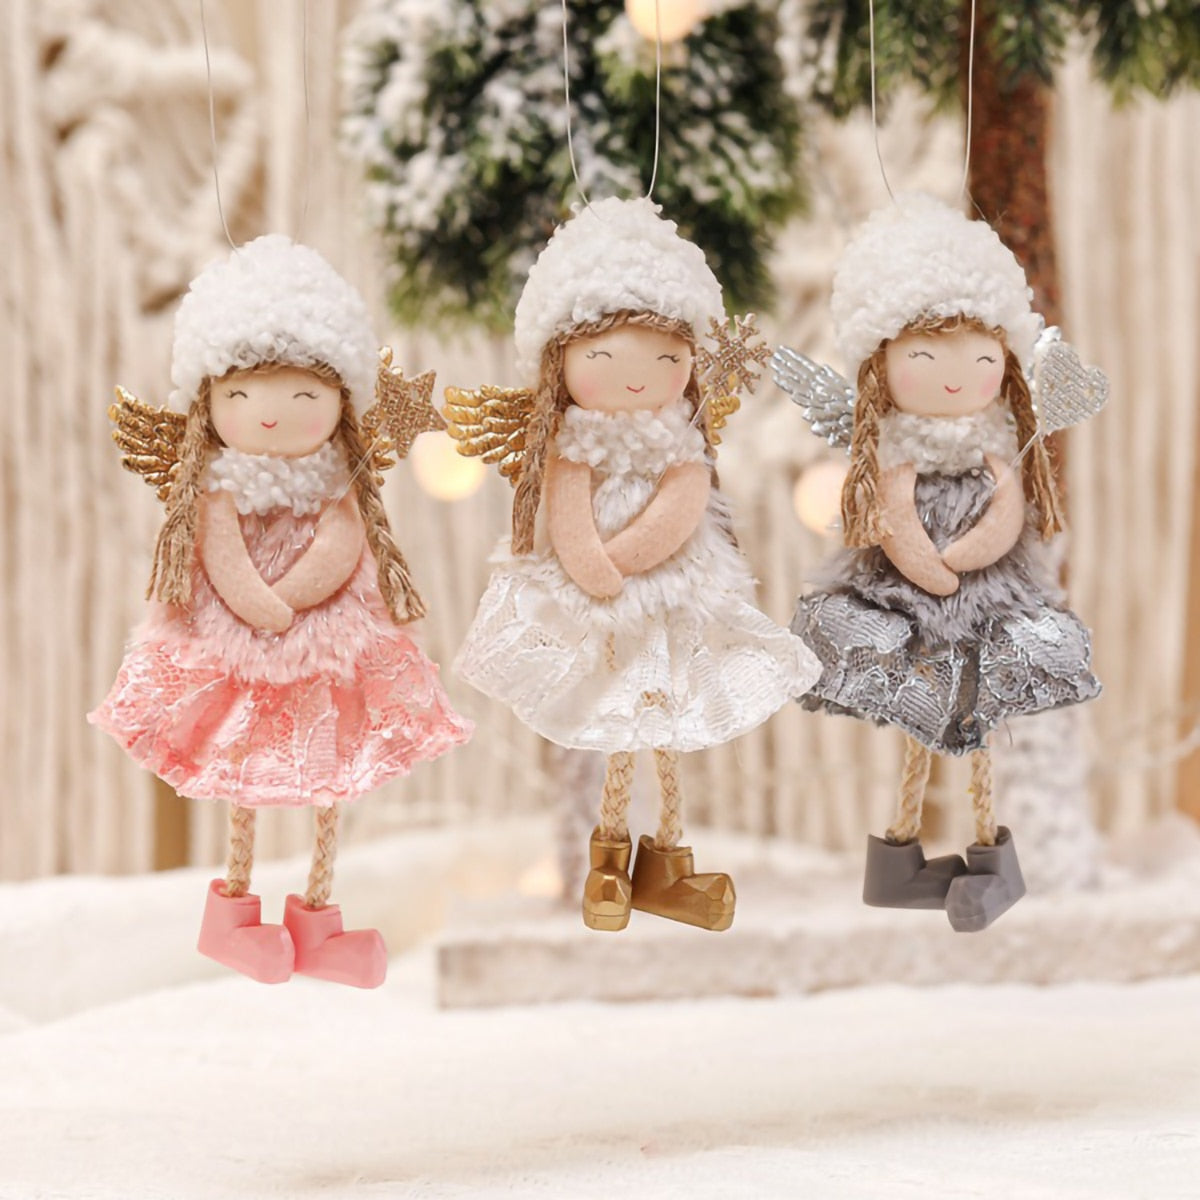 Merry Christmas Decorations For Home Angel Doll